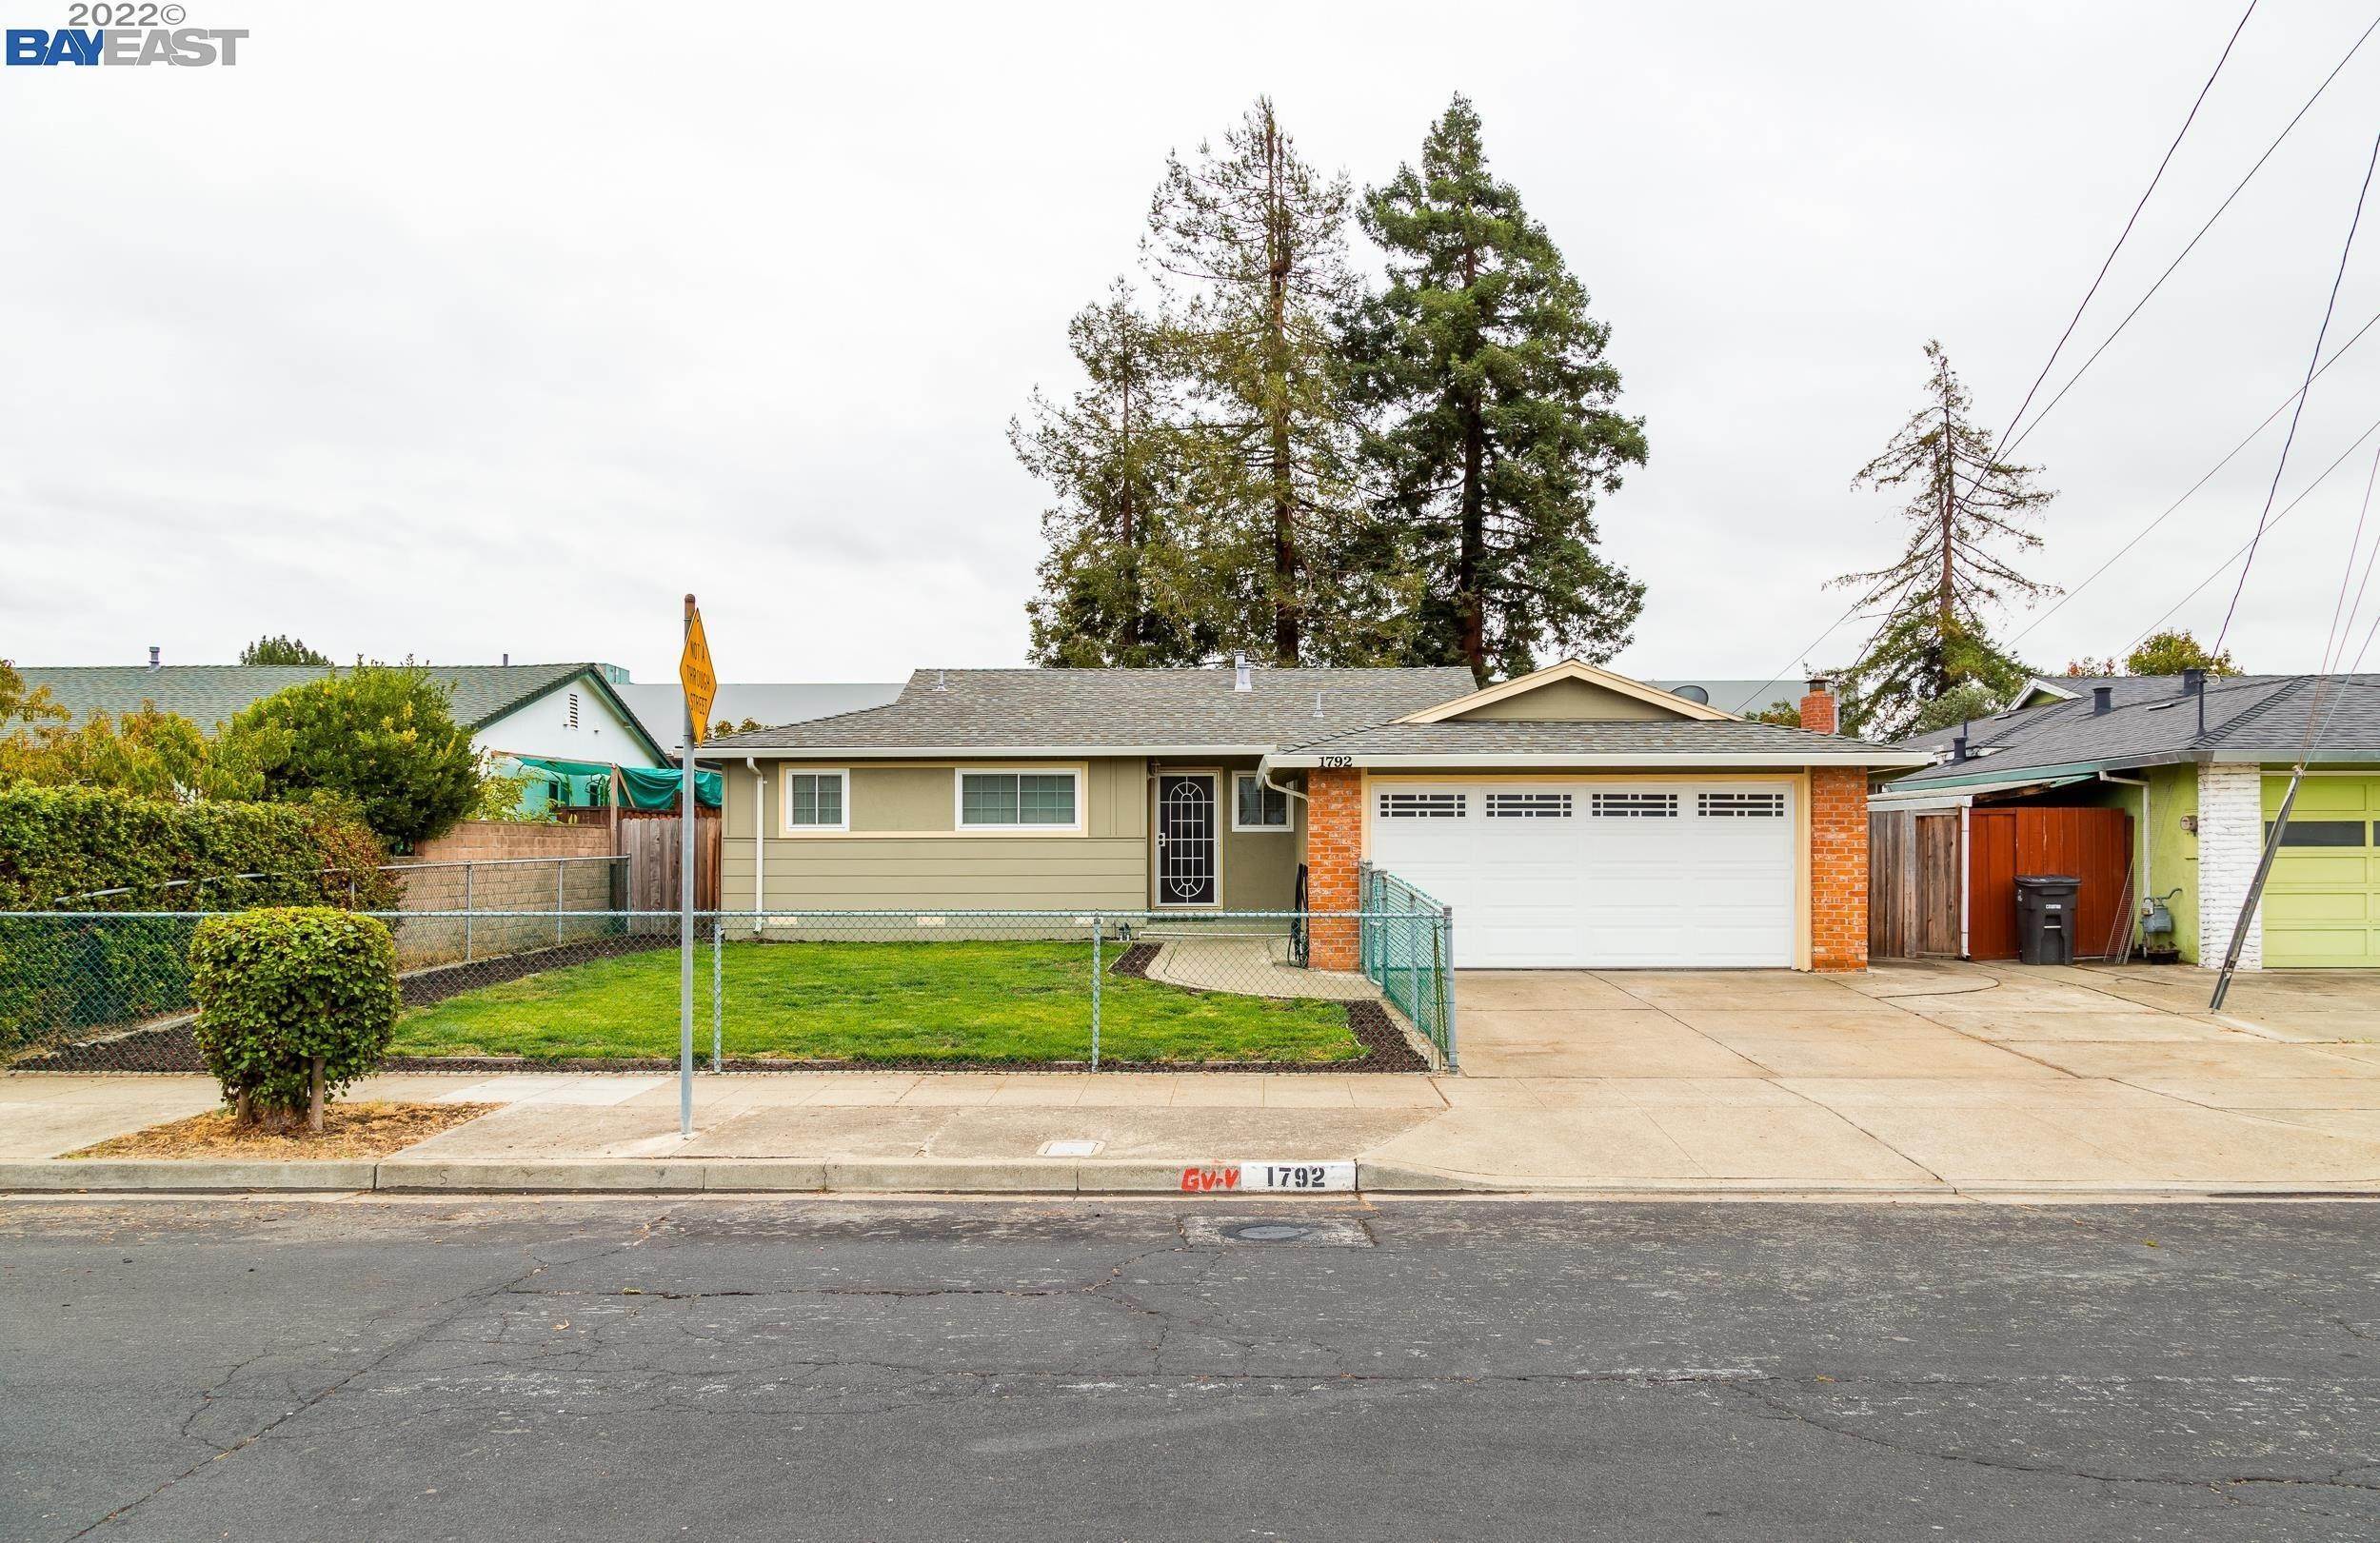 2. Single Family for Sale at Hayward, CA 94545